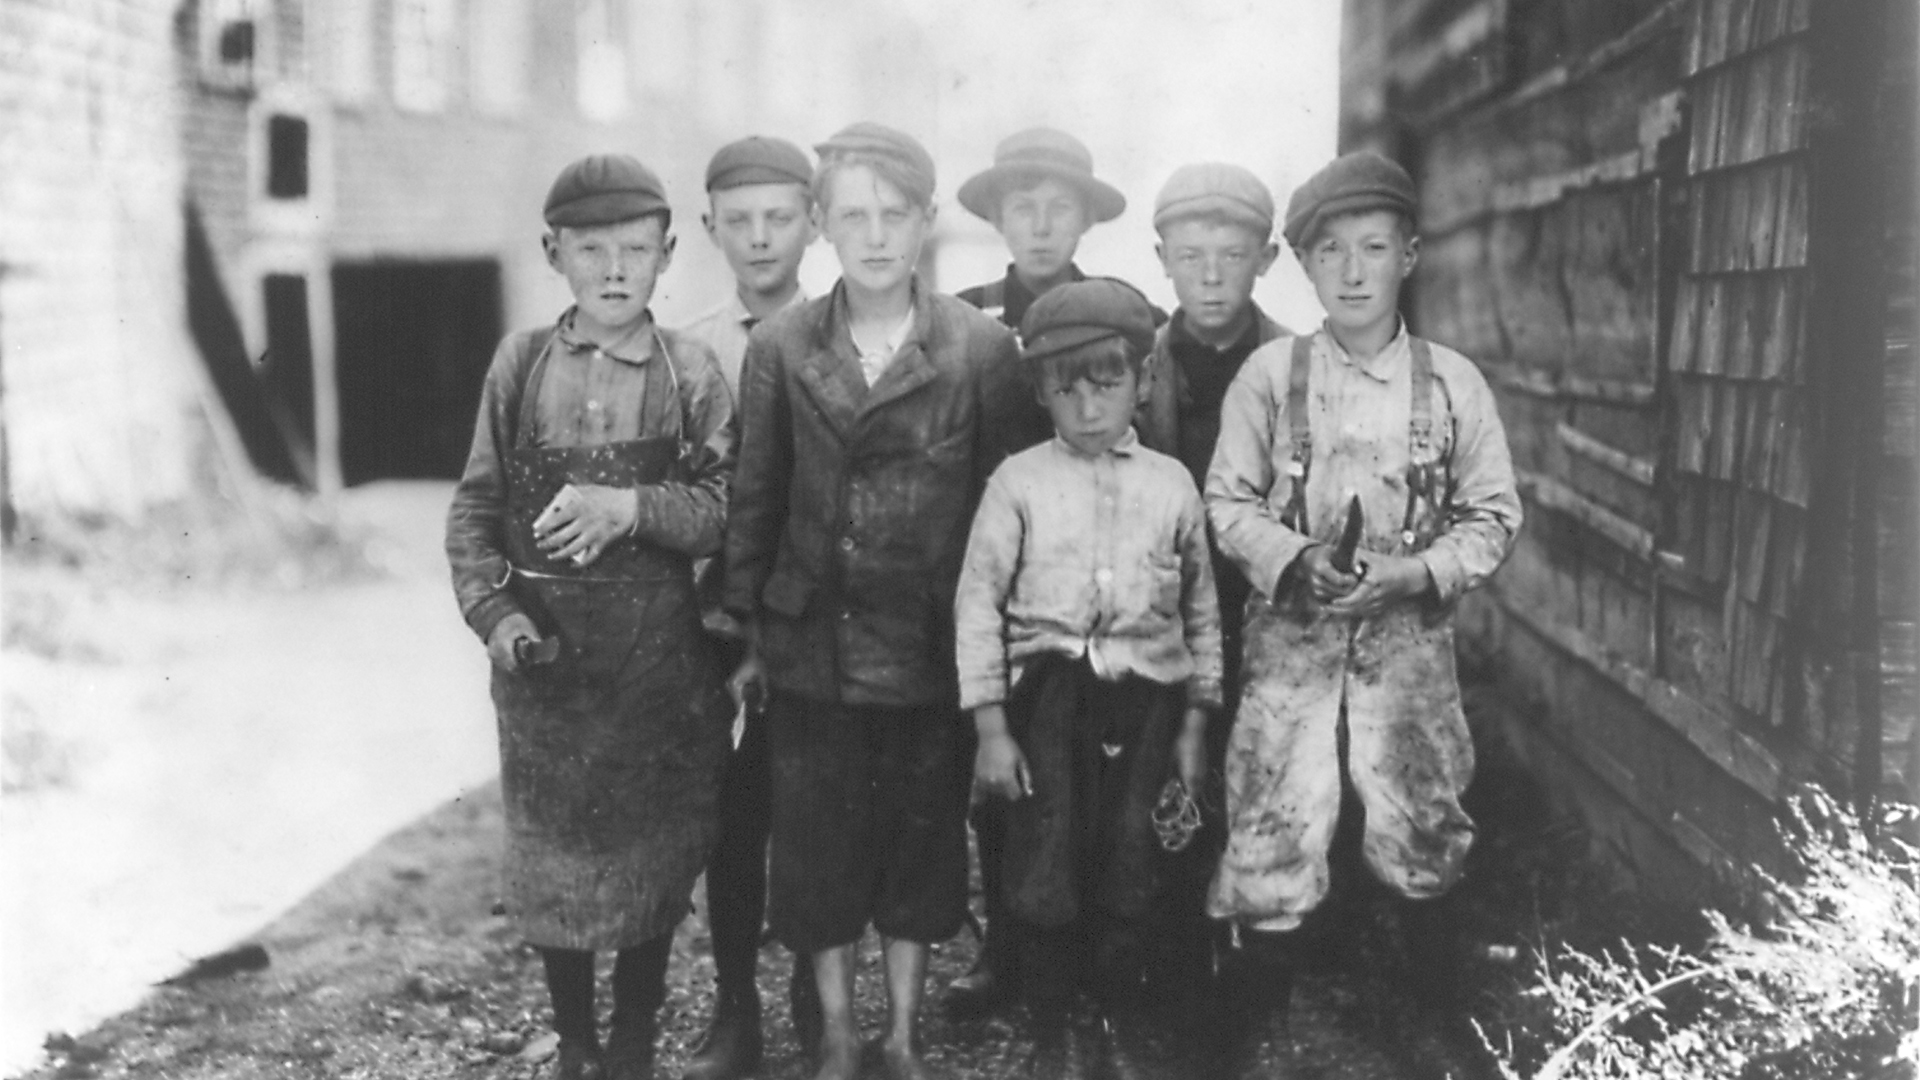 Working People: A History of Labour in British Columbia - E7 - Children ...